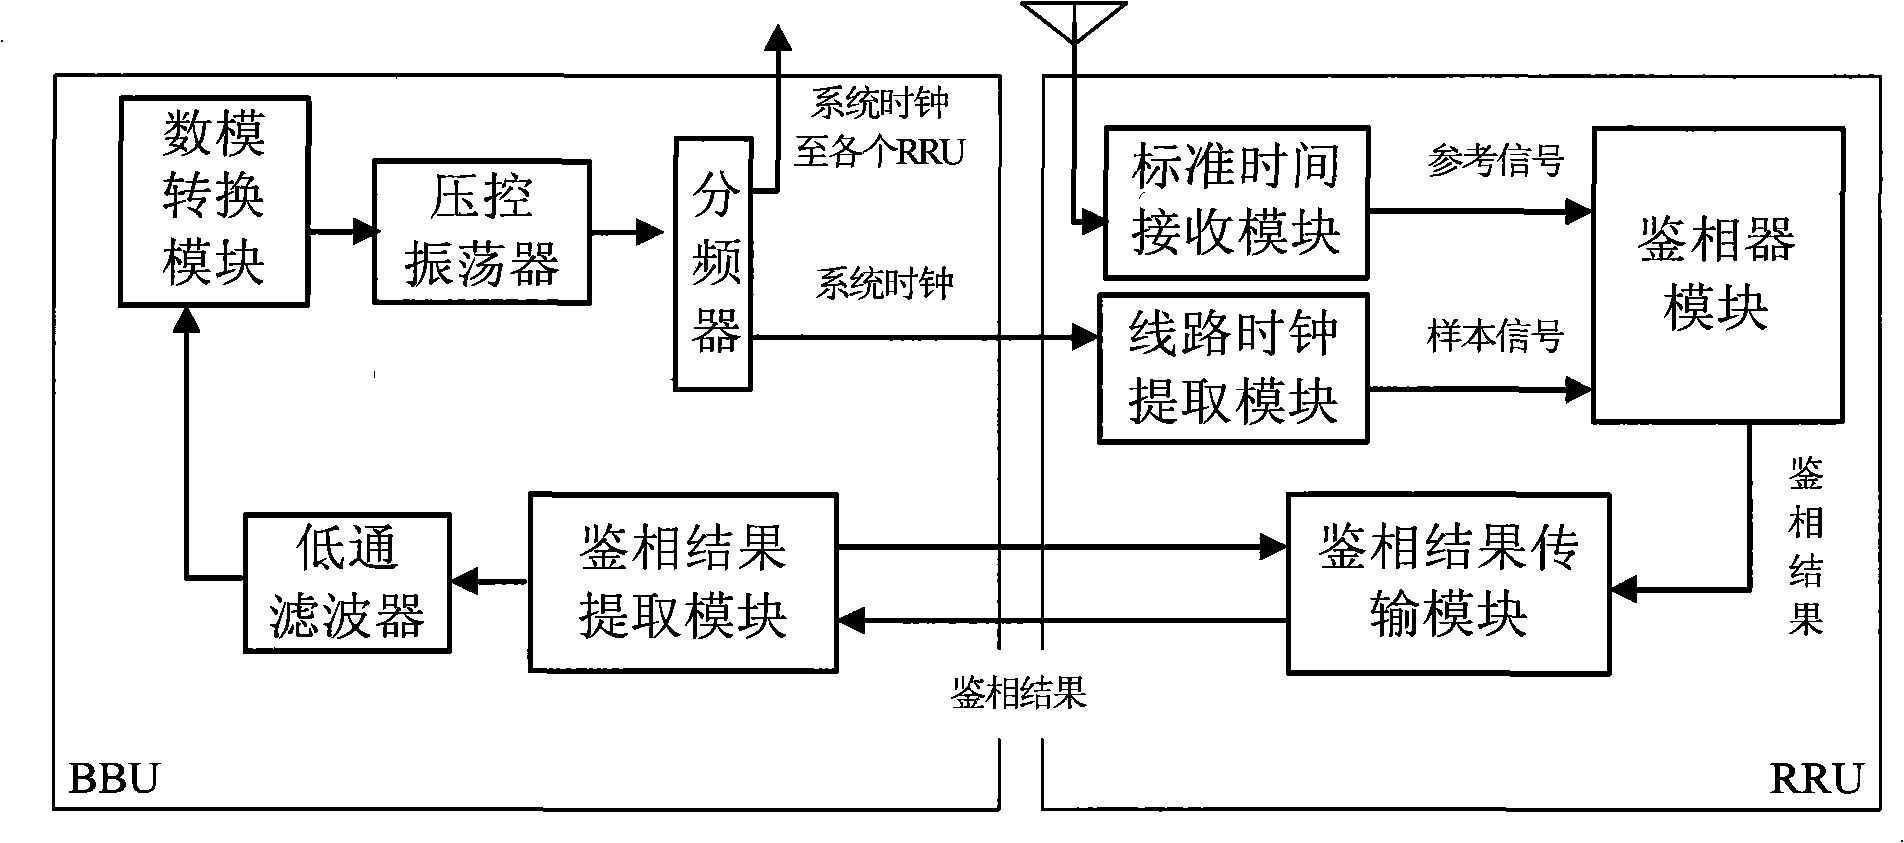 Distributed base station clock synchronization method and system